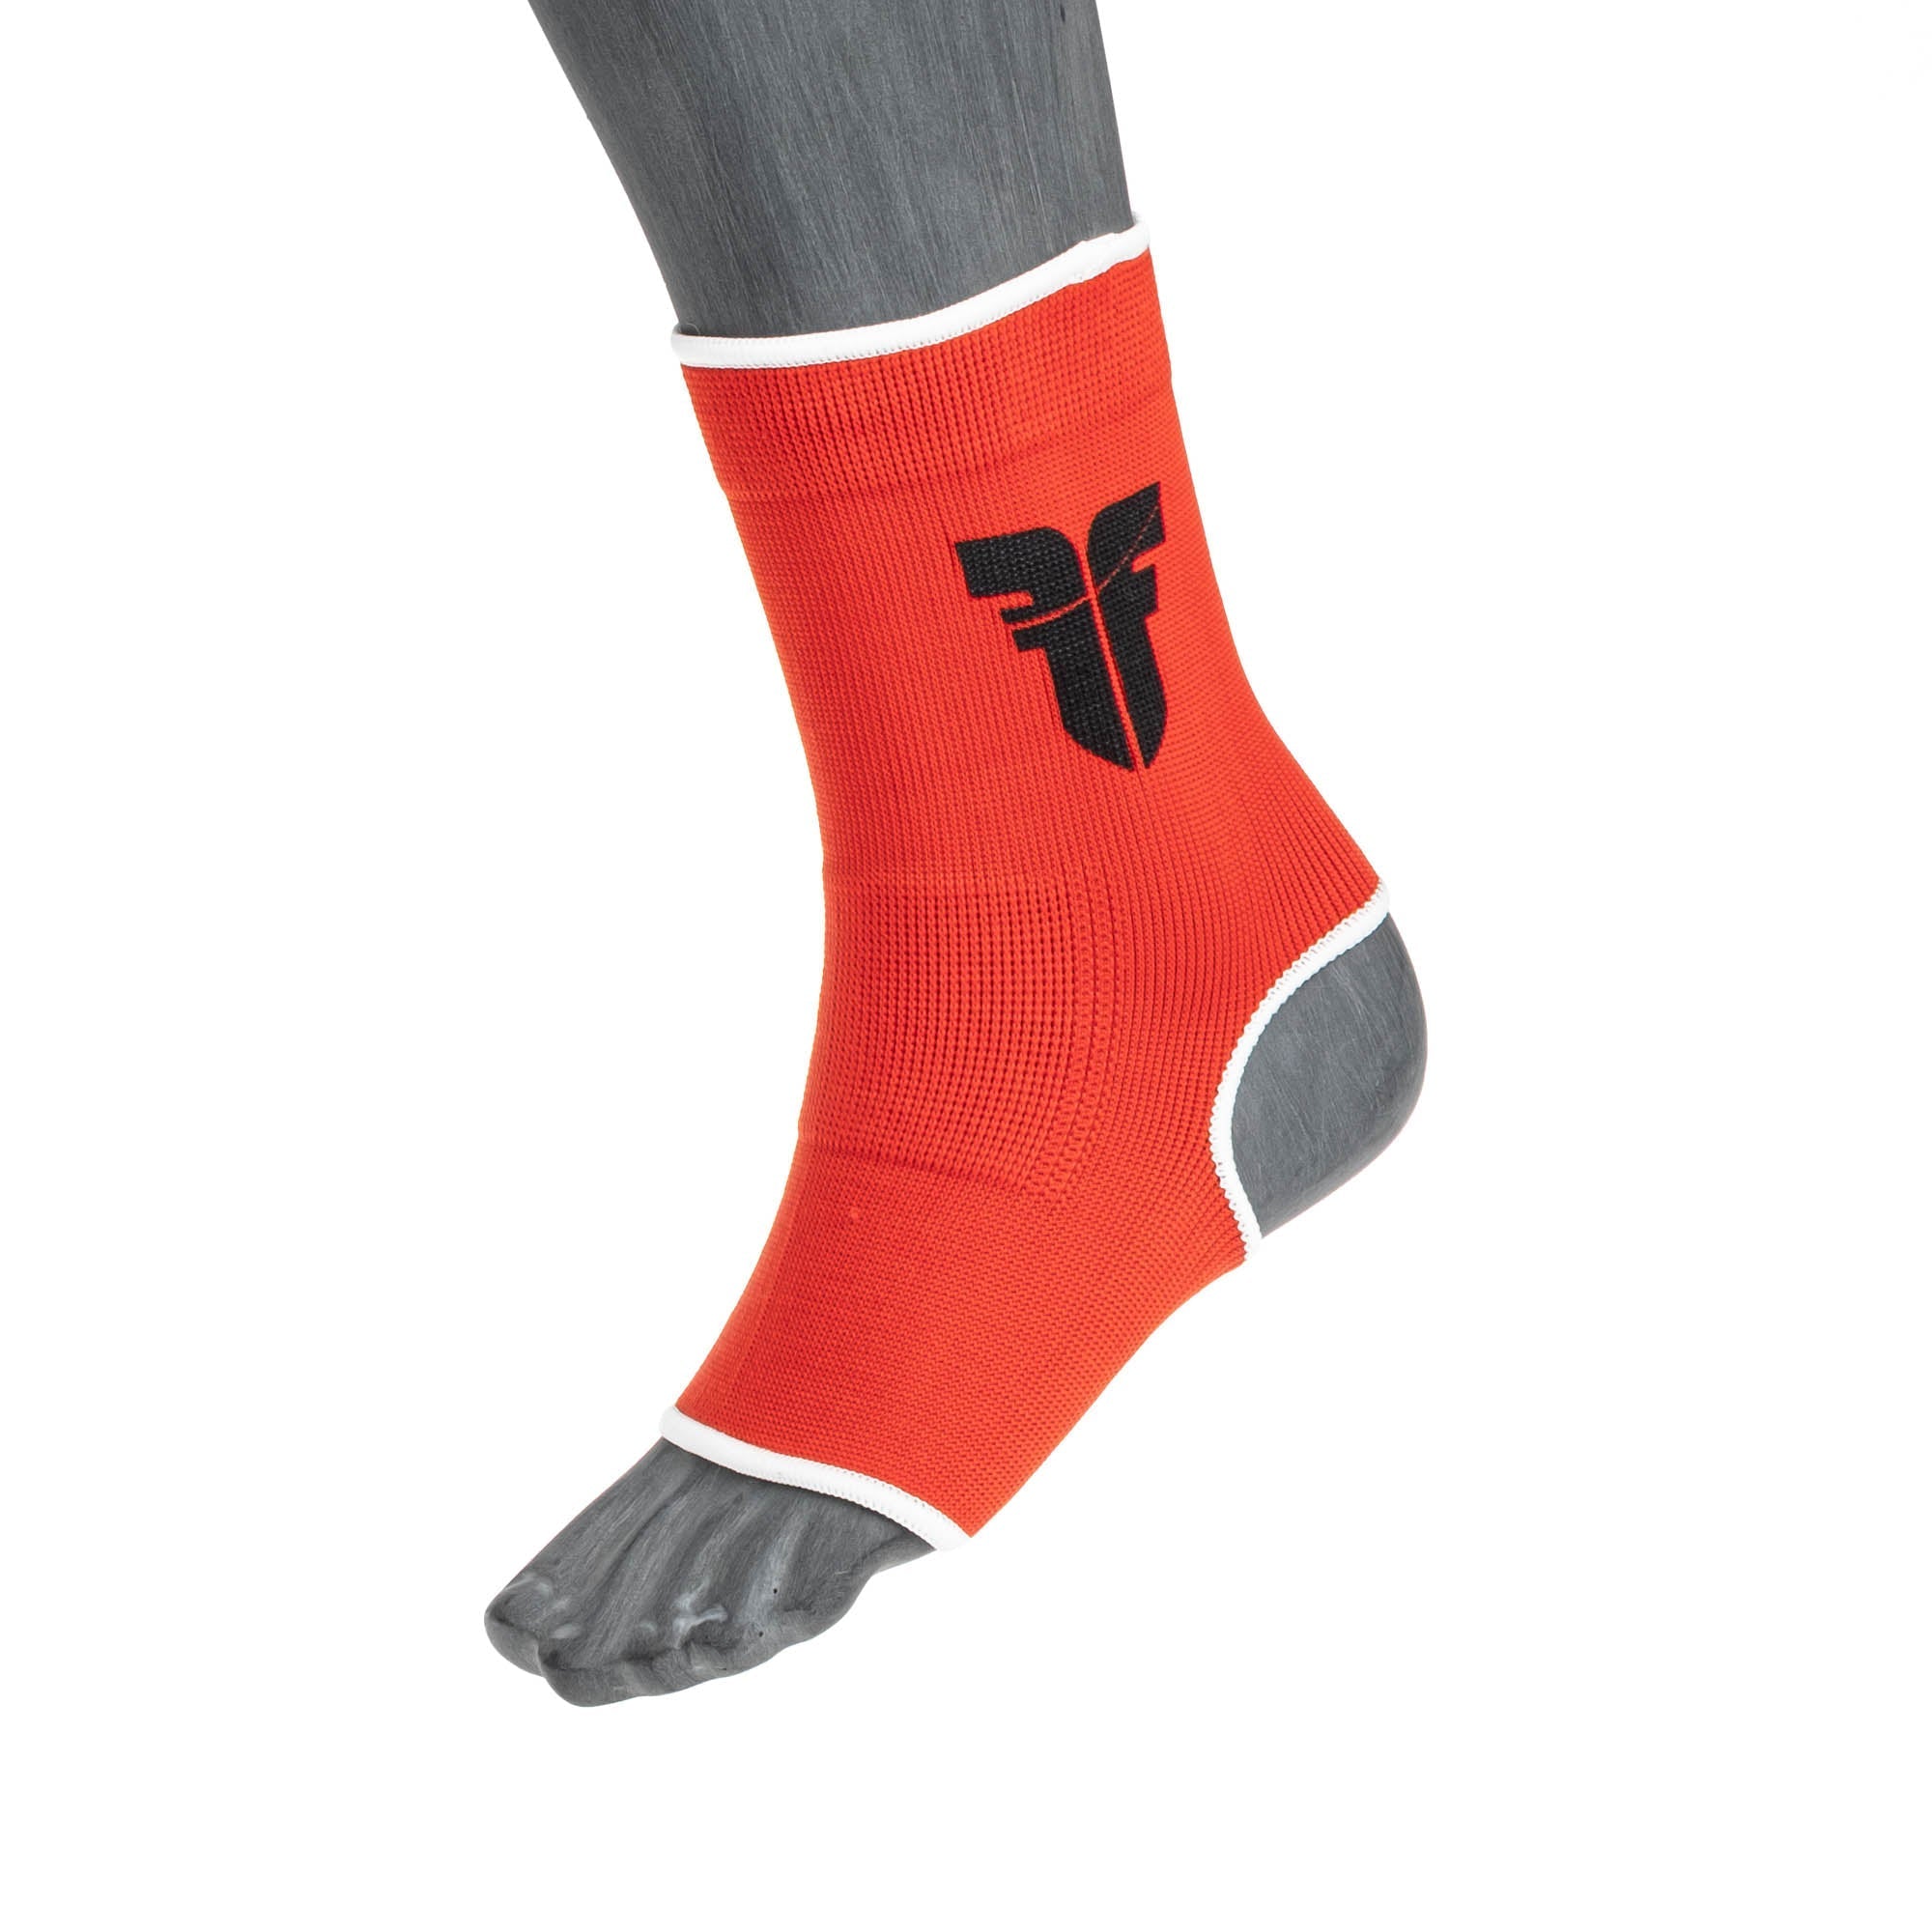 Fighter Ankle Support - red/white, JE-1508R